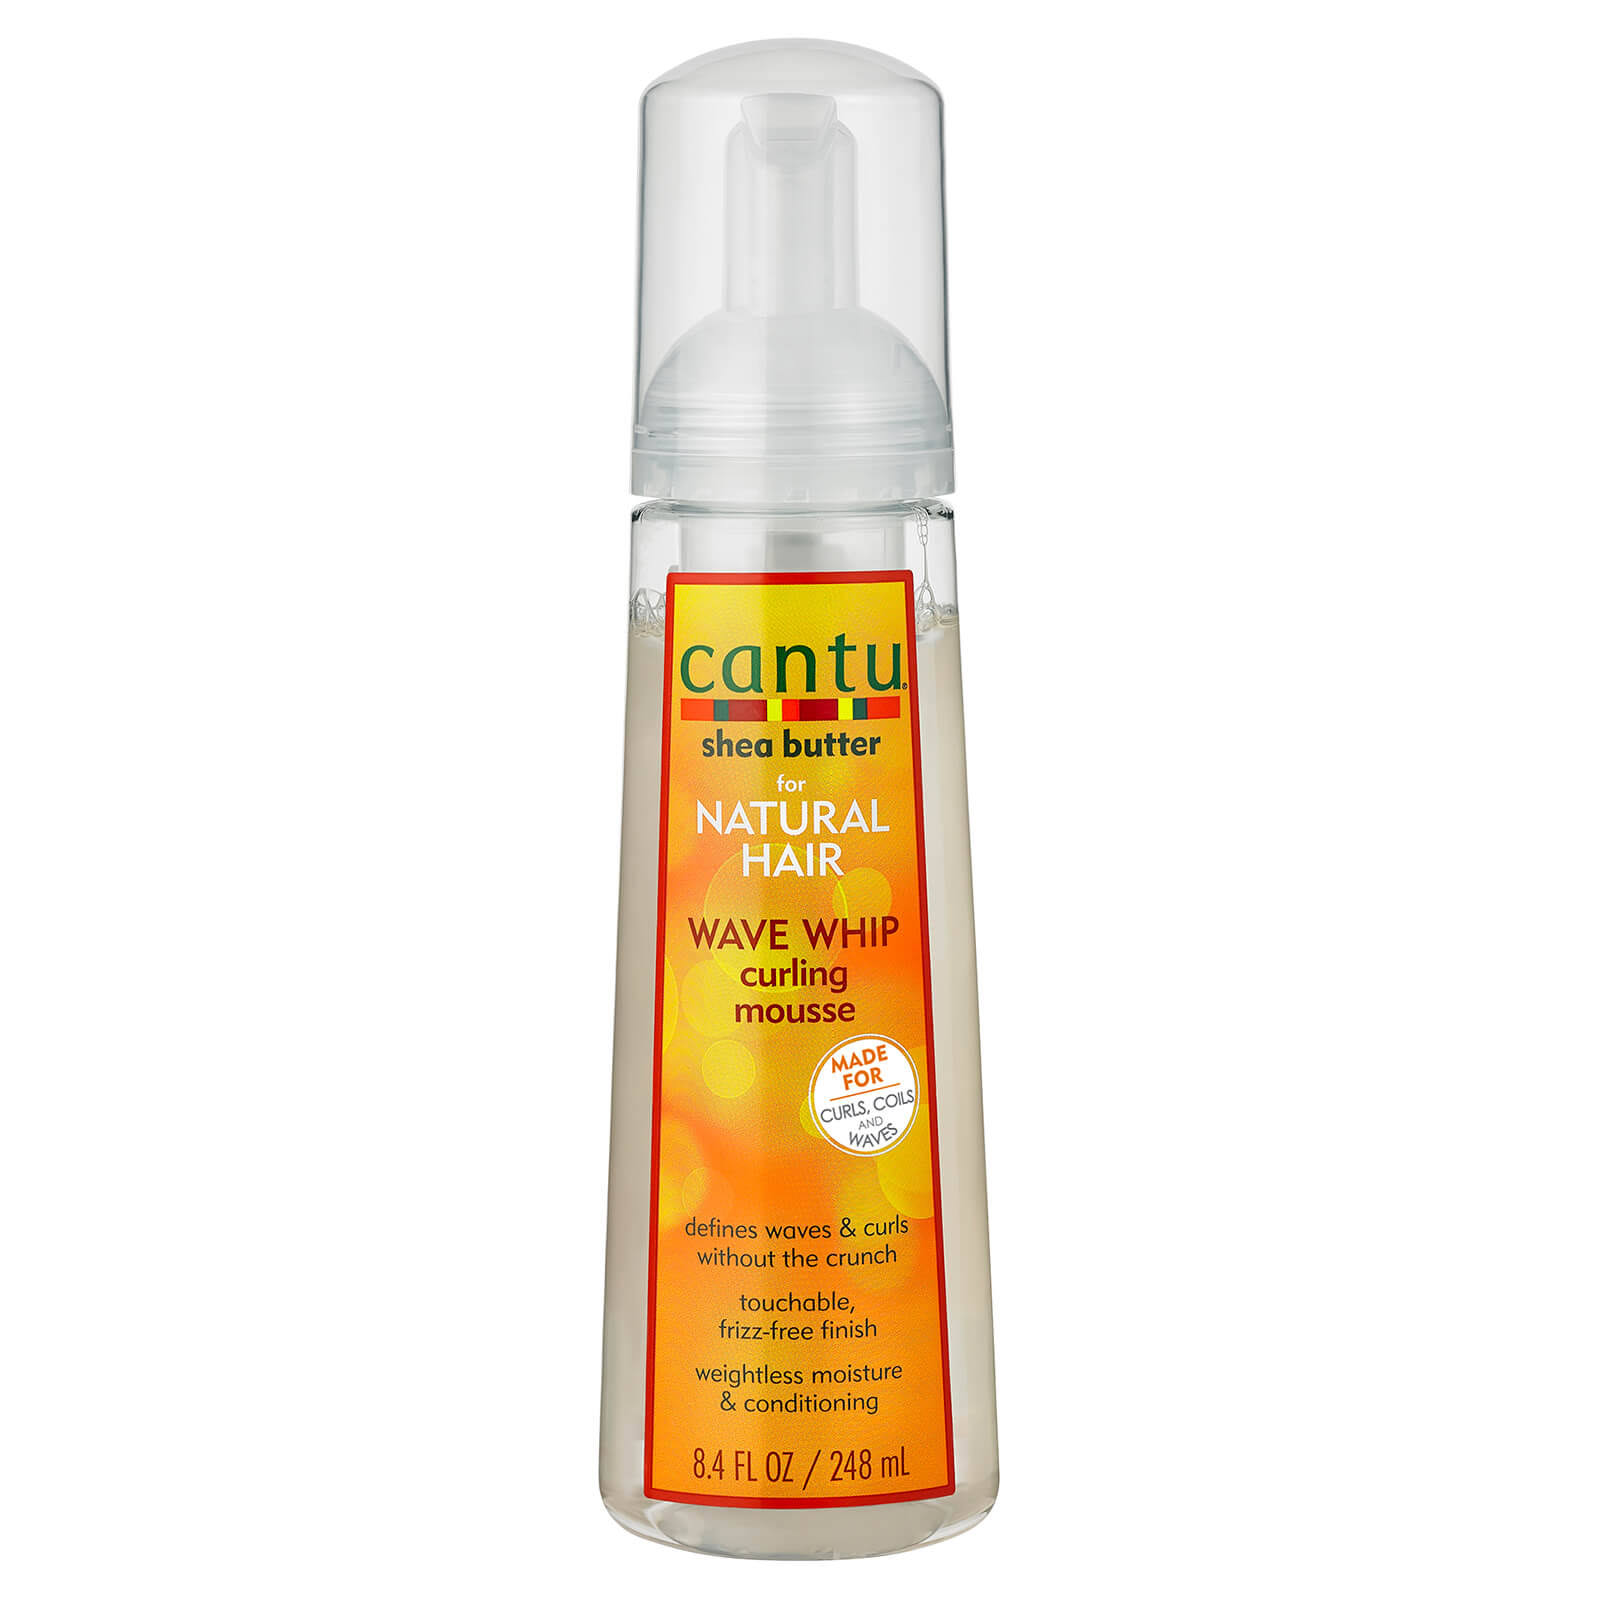 Cantu Shea Butter For Natural Hair Wave Whip Curling Mousse, 8.4 fl oz